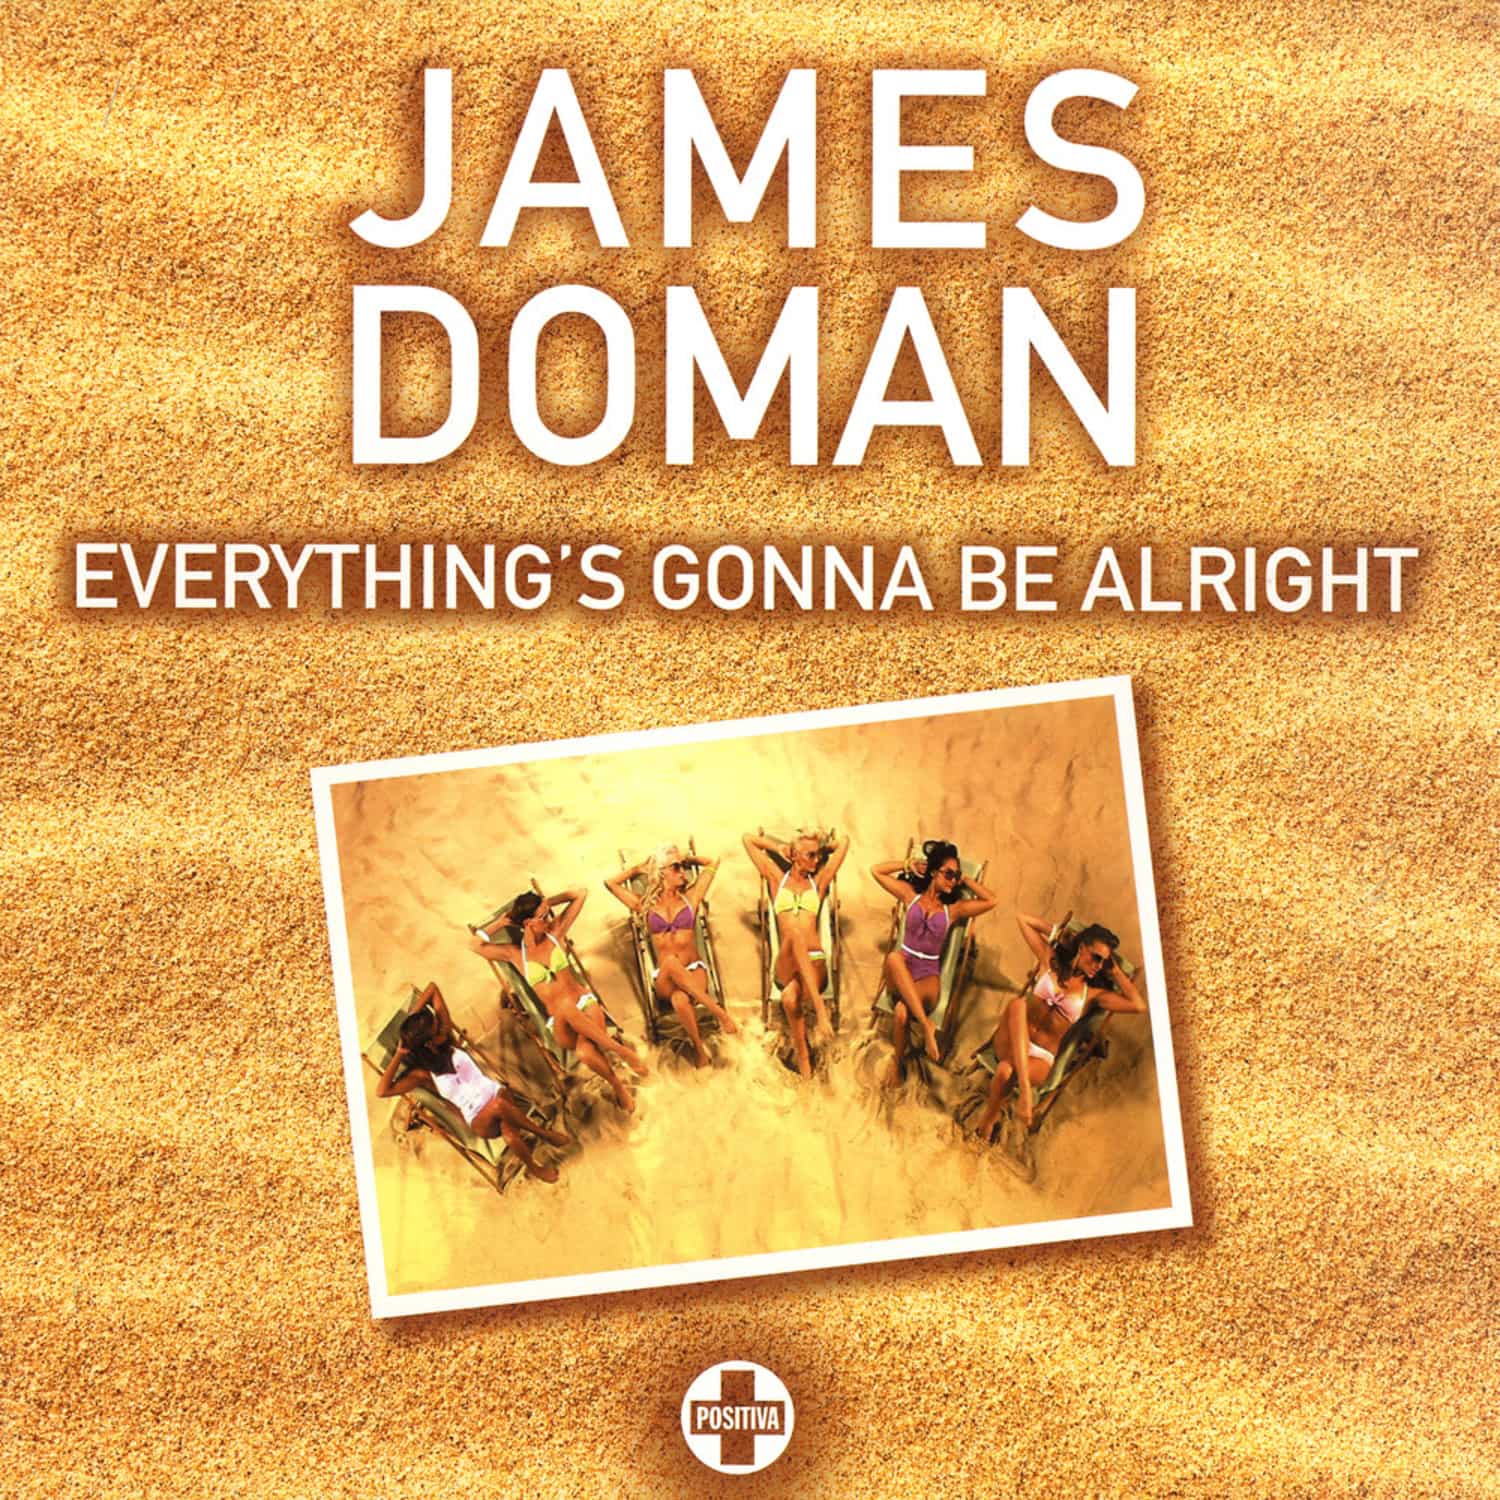 James Doman - EVERYTHINGS GONNA BE ALLRIGHT